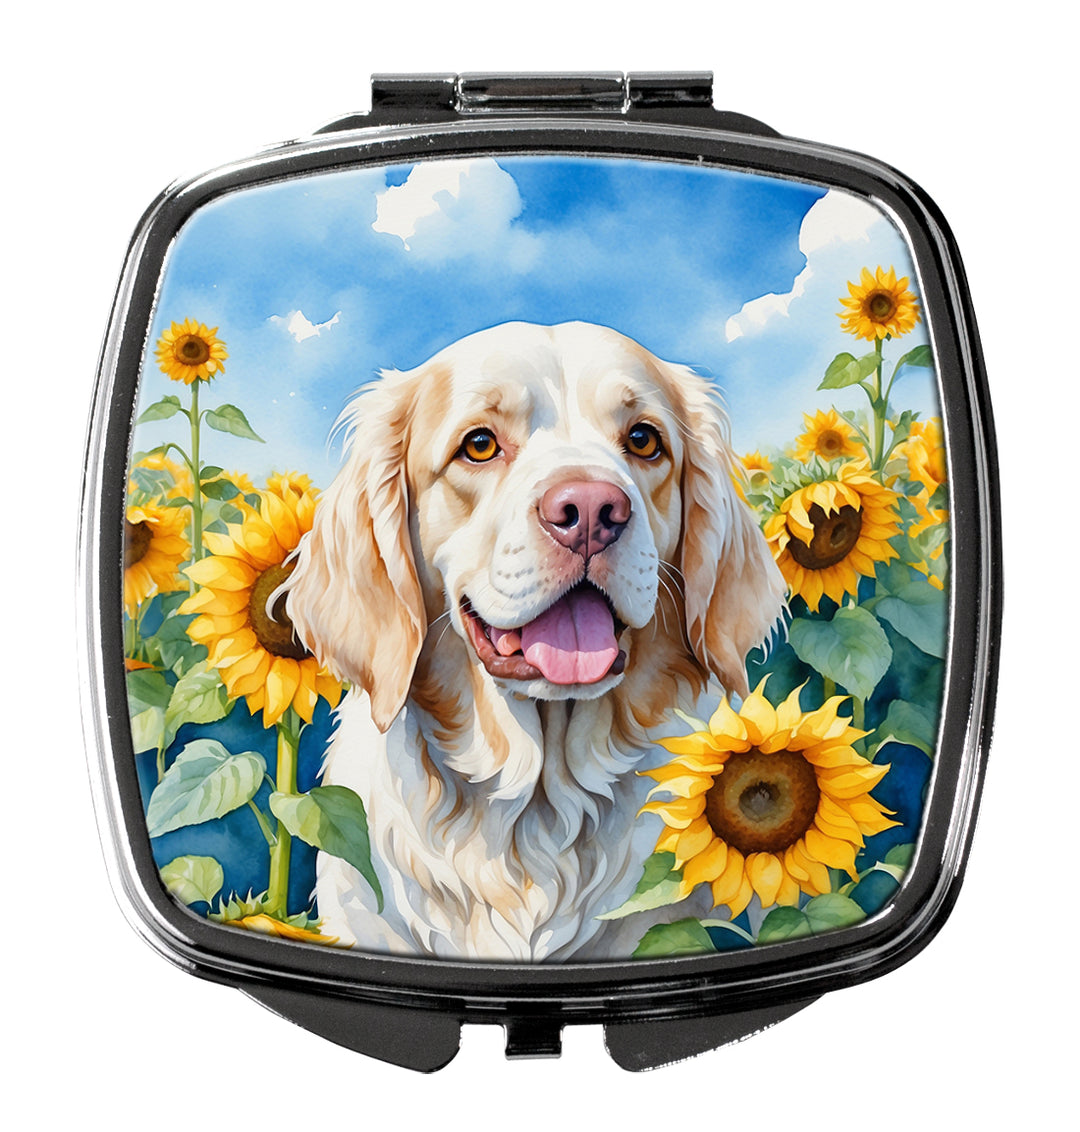 Yorkshire Terrier in Sunflowers Compact Mirror Image 8